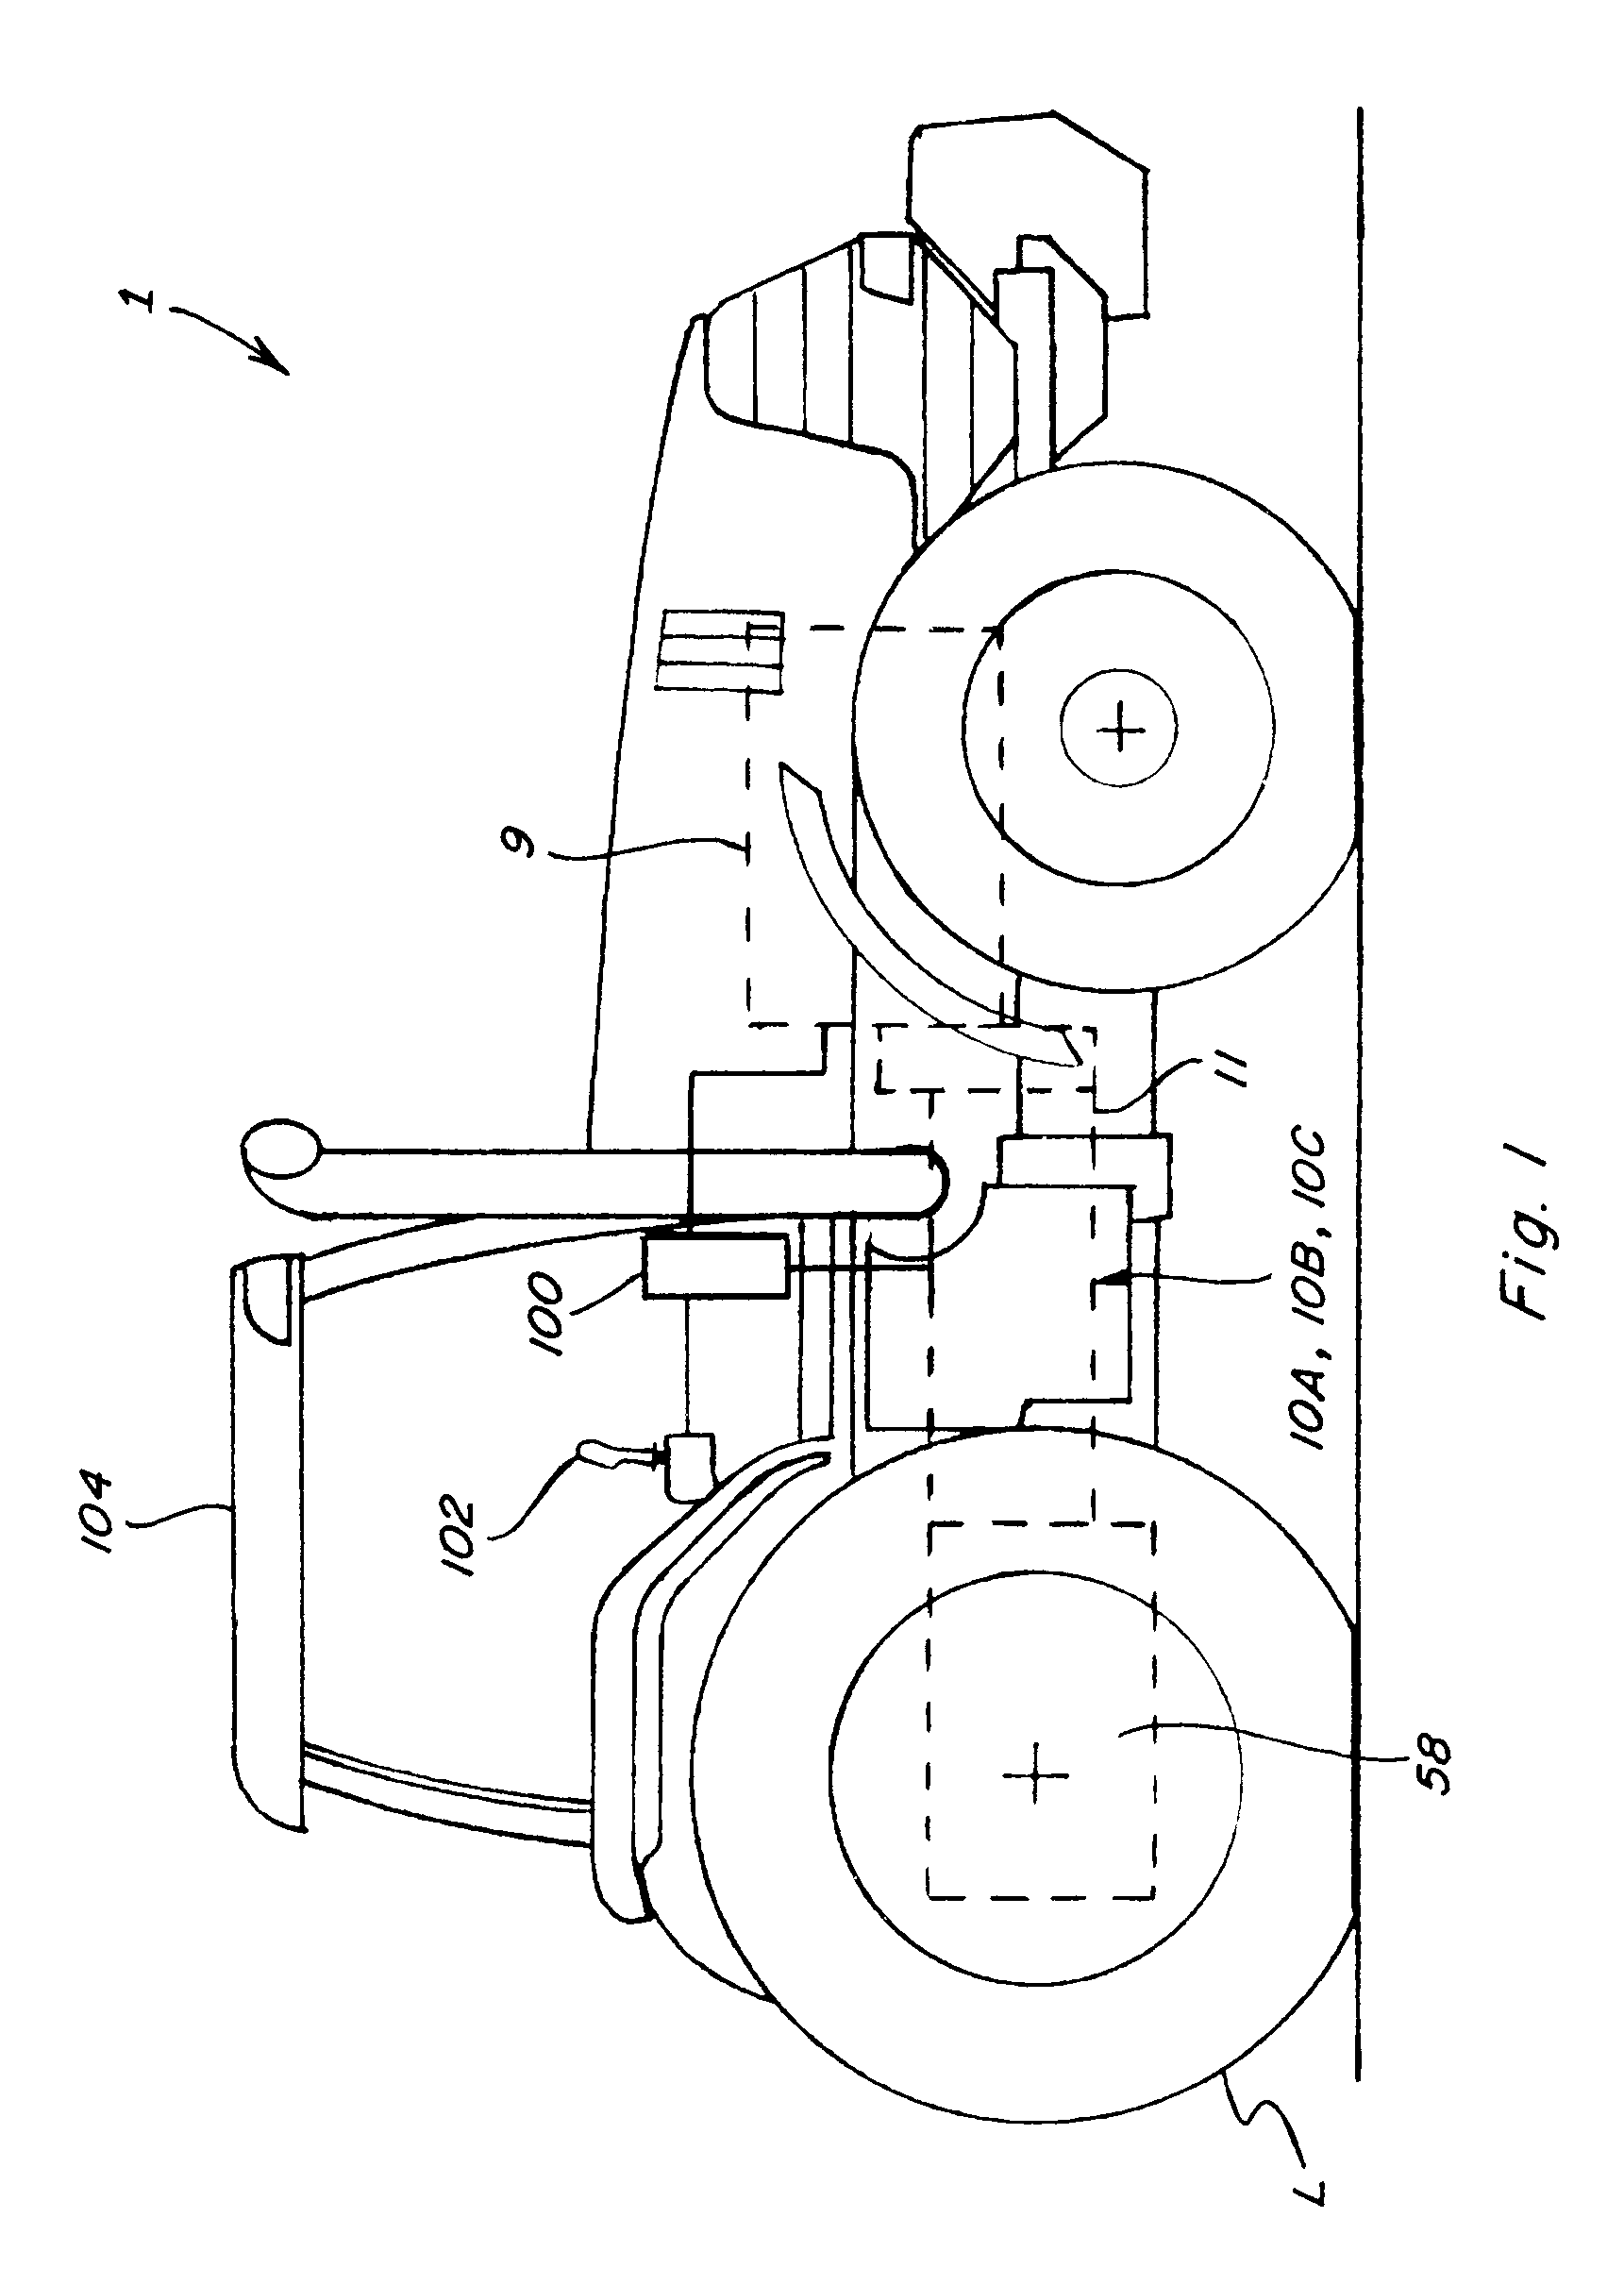 Method for estimating and controlling driveline torque in a continuously variable hydro-mechanical transmission